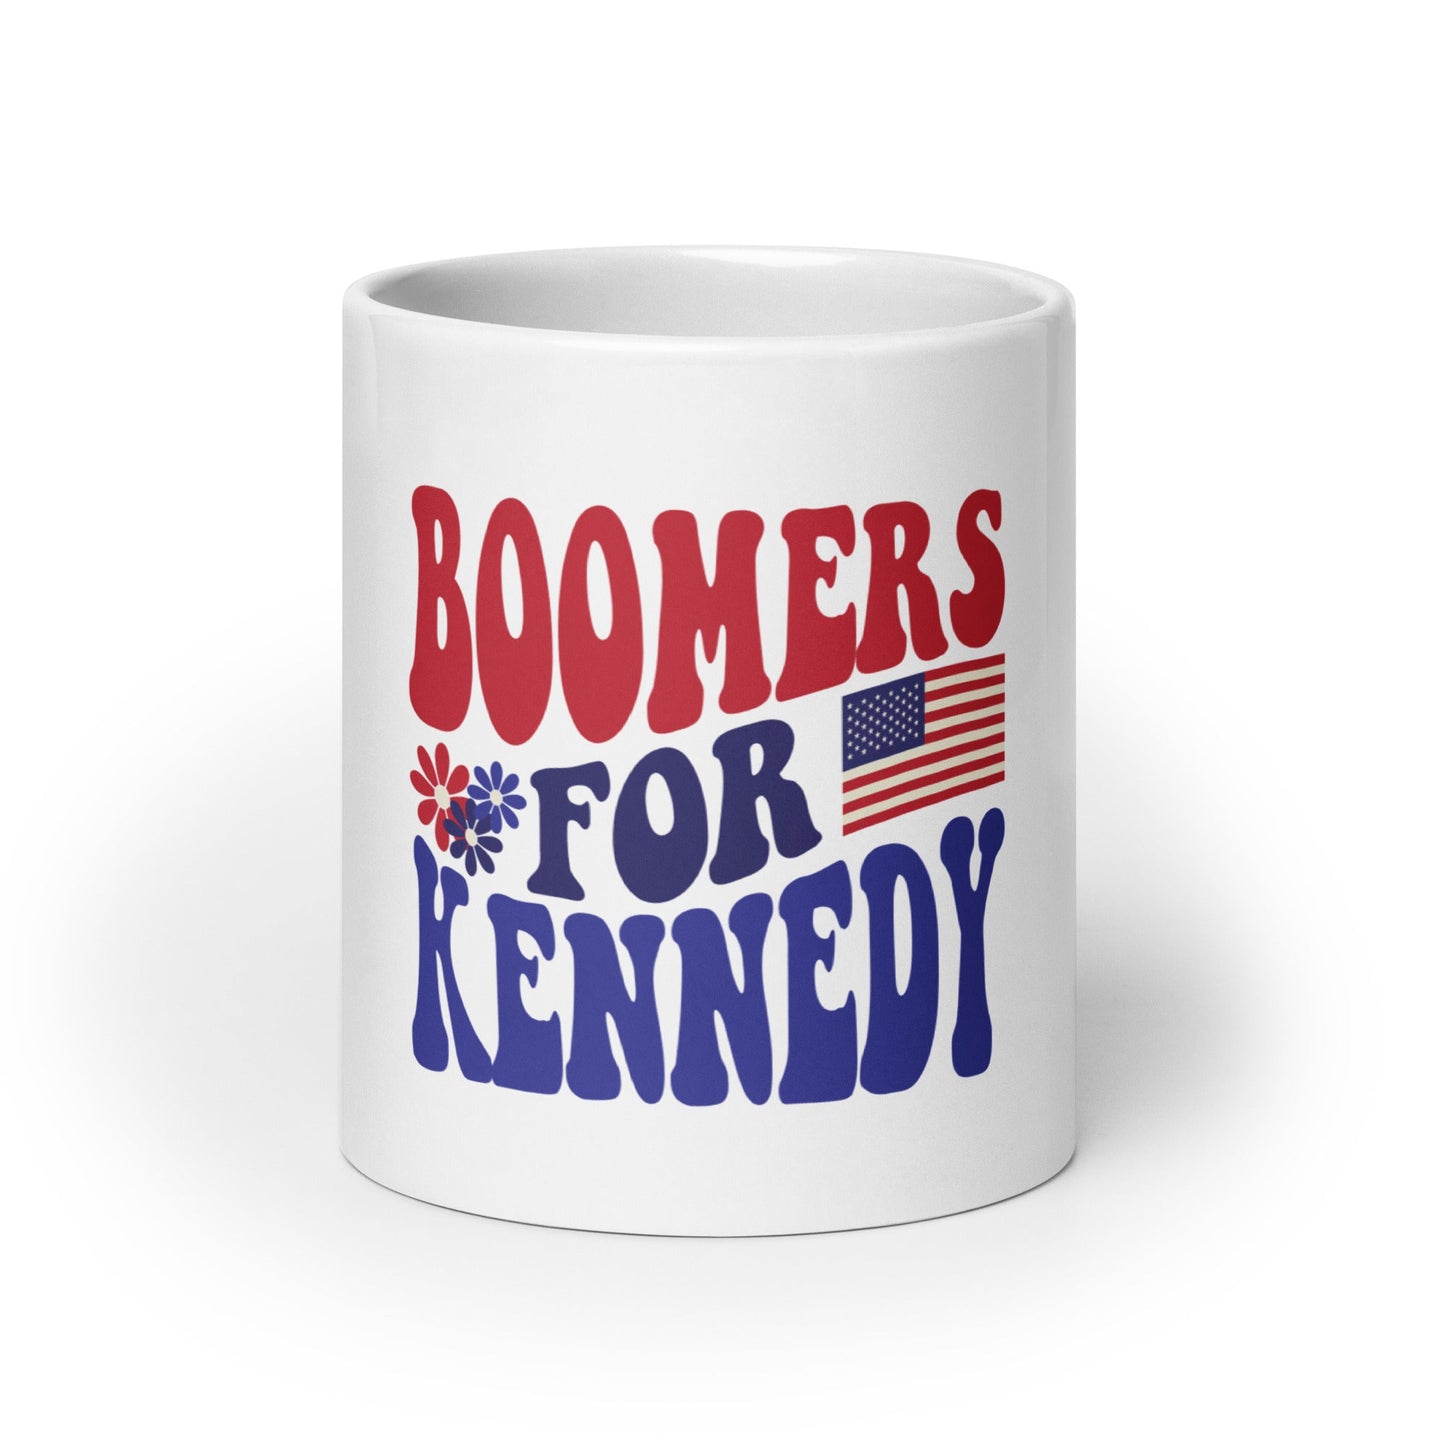 Boomers for Kennedy Mug - TEAM KENNEDY. All rights reserved